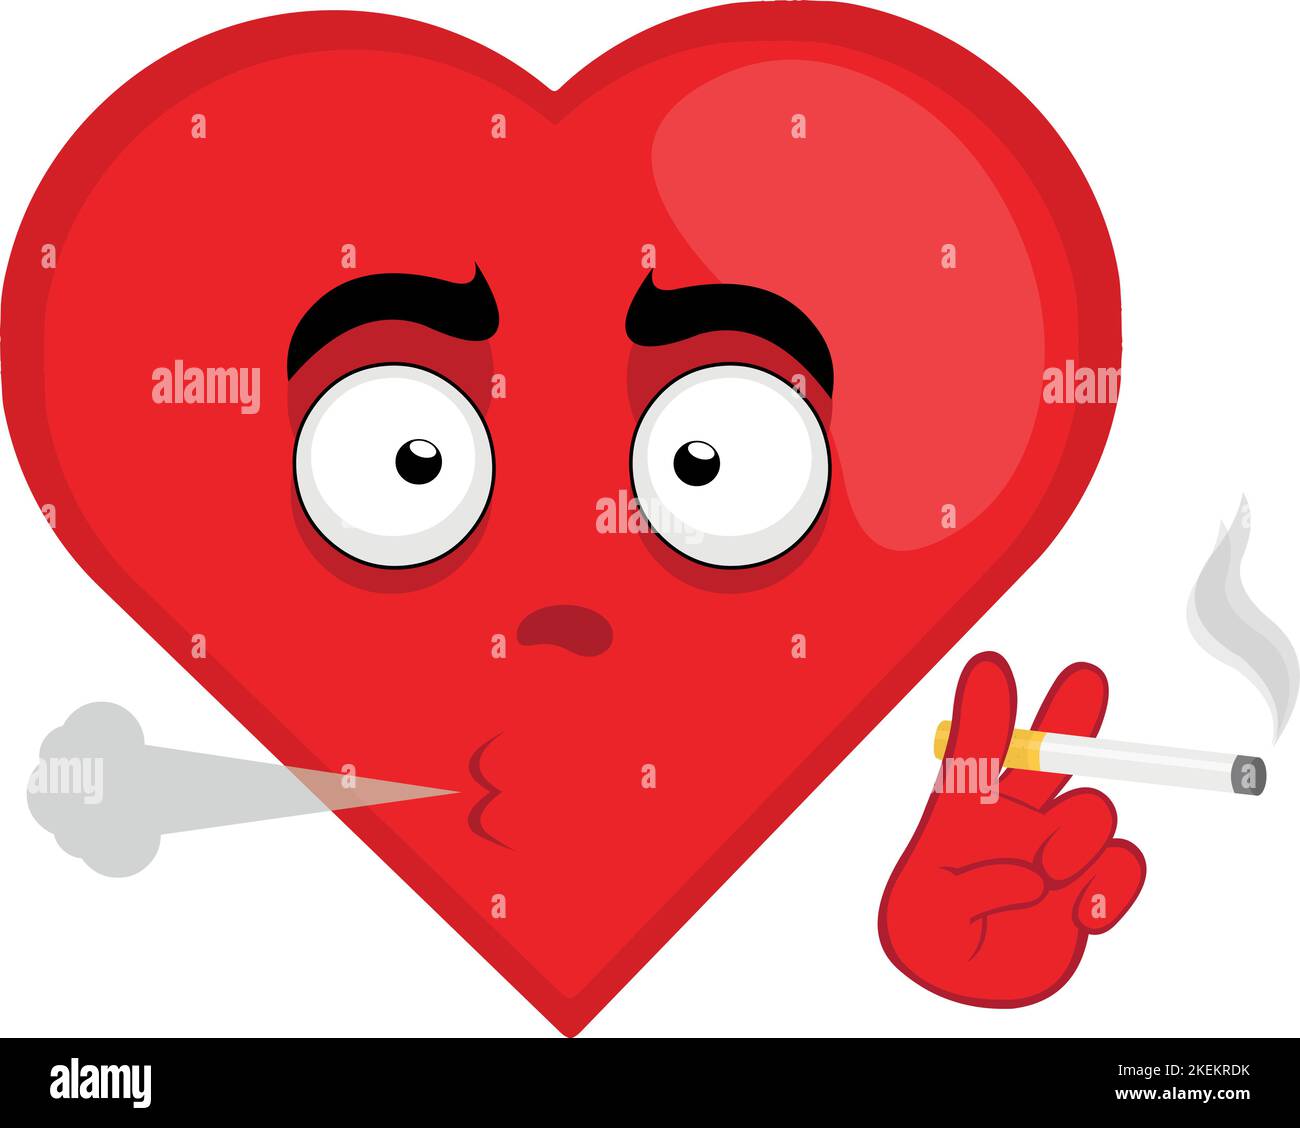 vector emoticon illustration of a heart shaped cartoon character smoking a cigarette Stock Vector